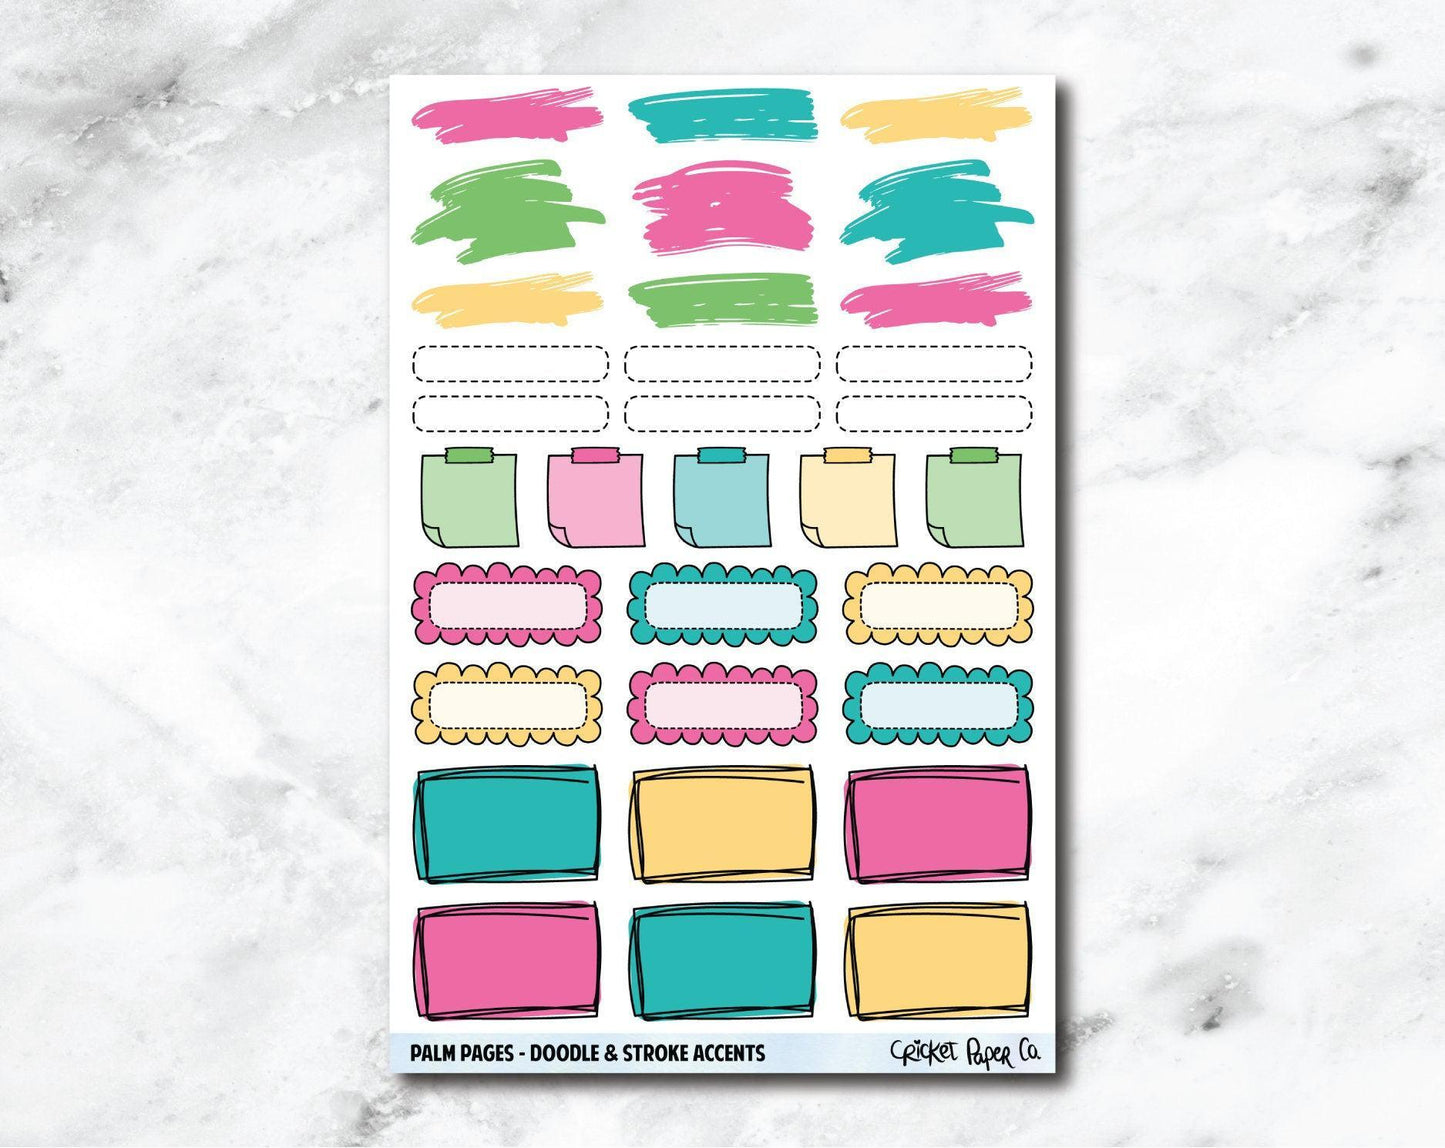 Doodle & Stroke Accents Planner Stickers - Palm Pages-Cricket Paper Co.